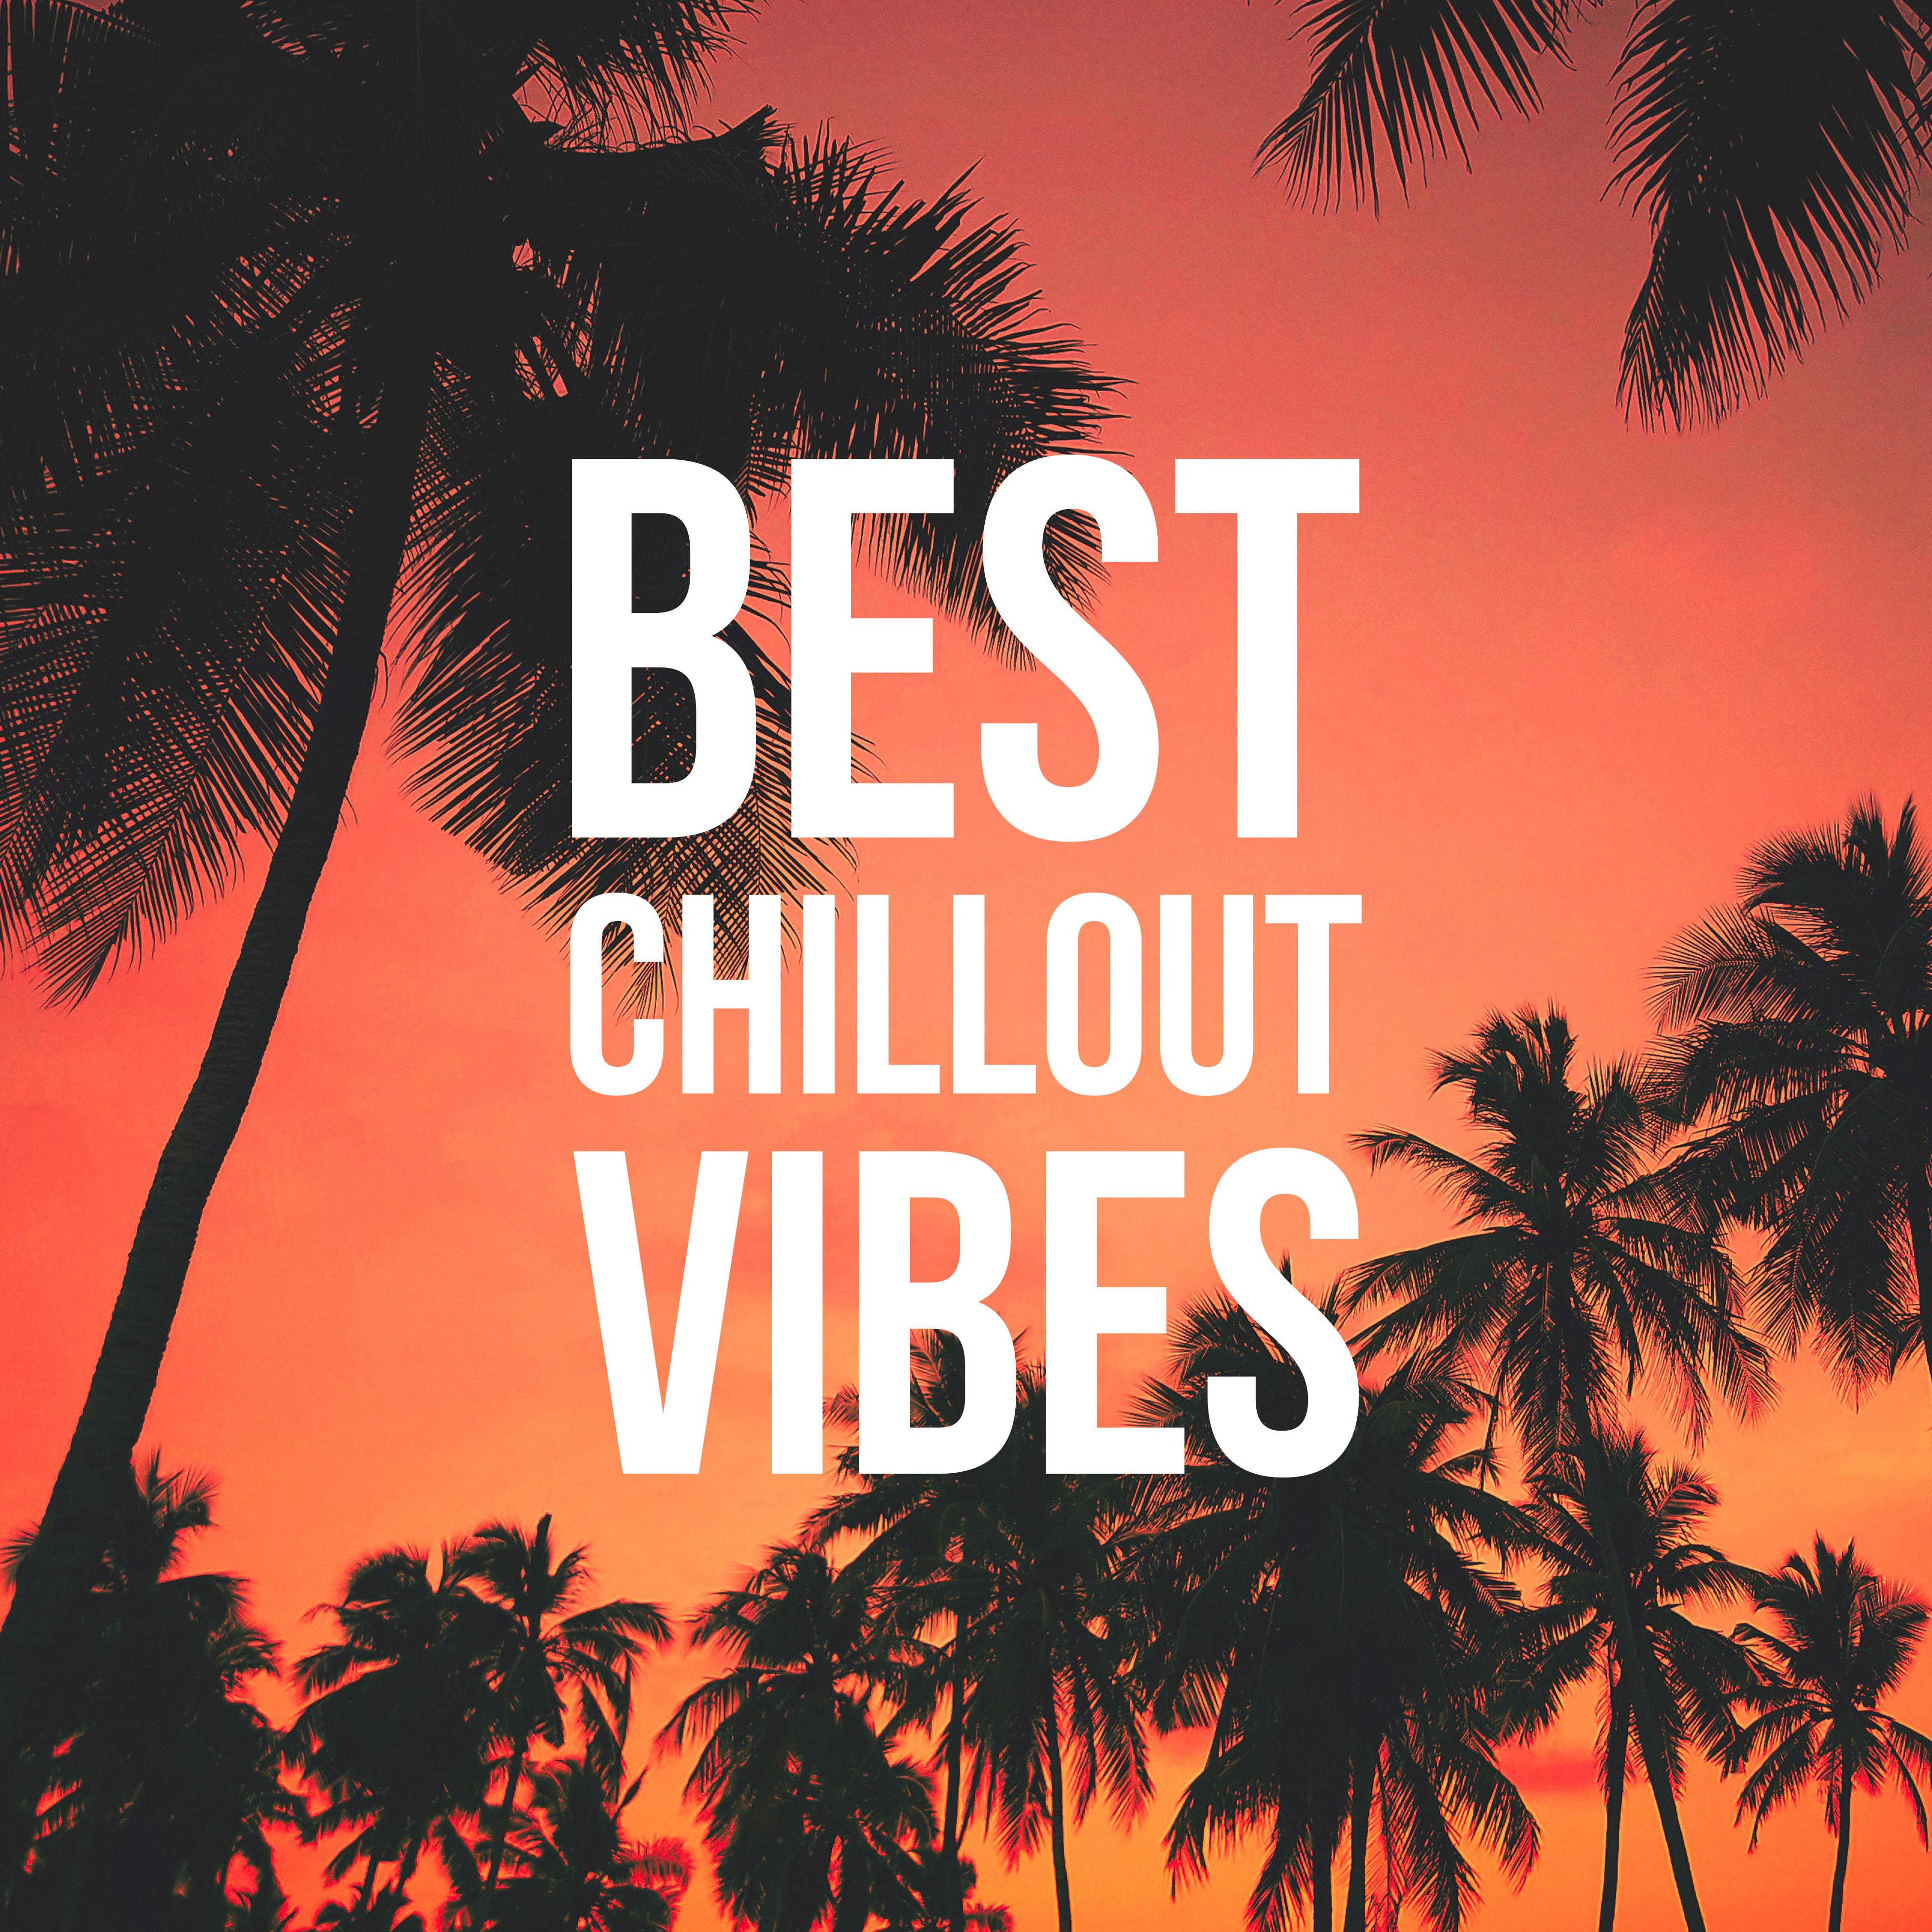 Best Chillout Vibes